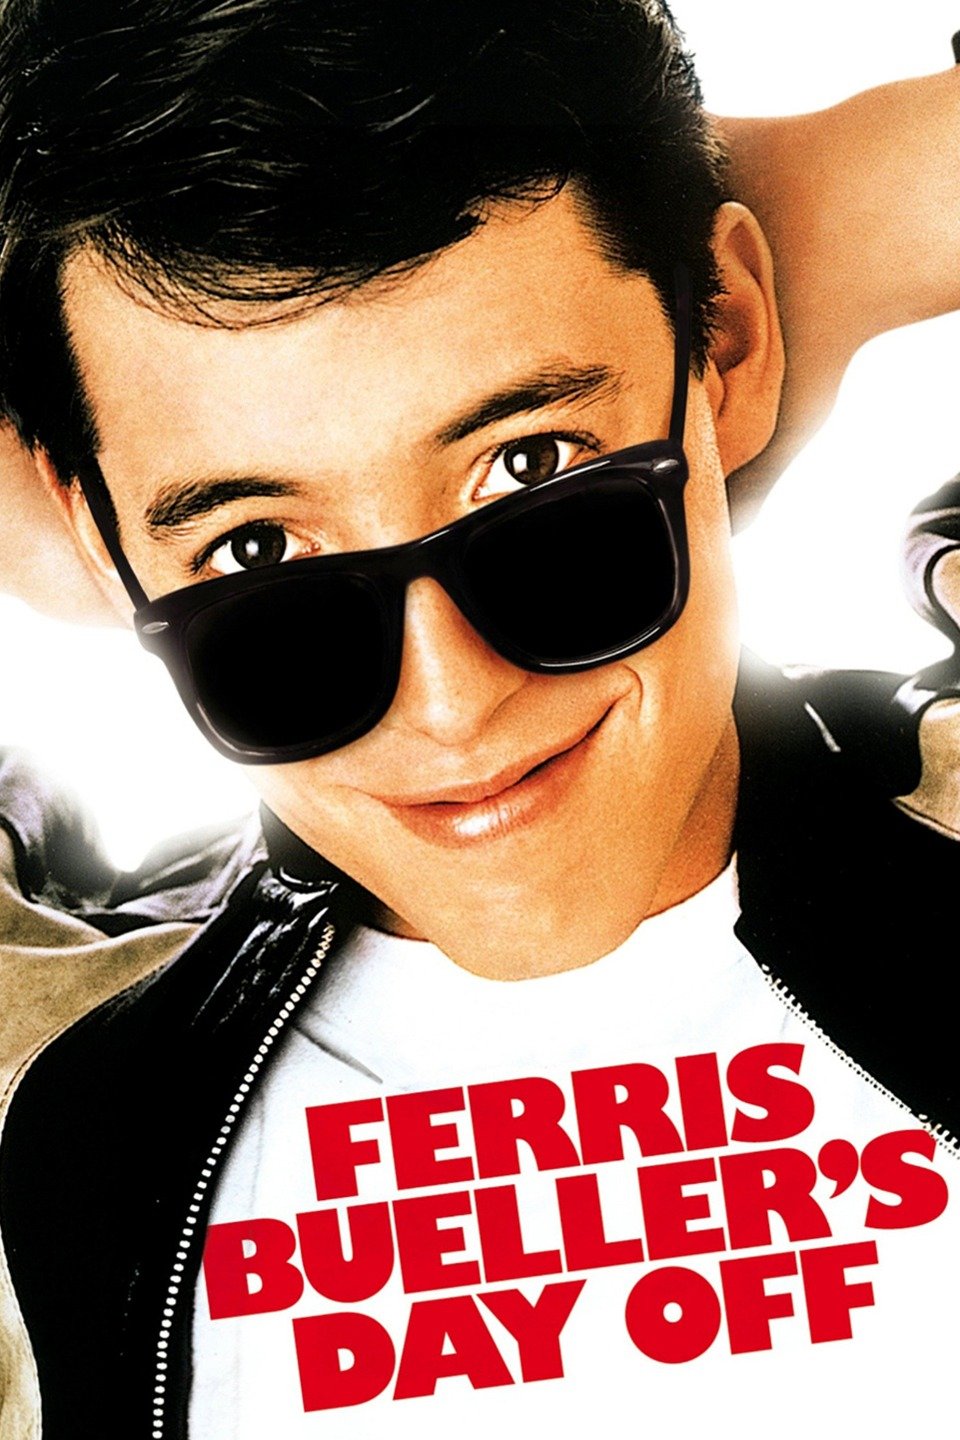 Image result for ferris bueller's day off